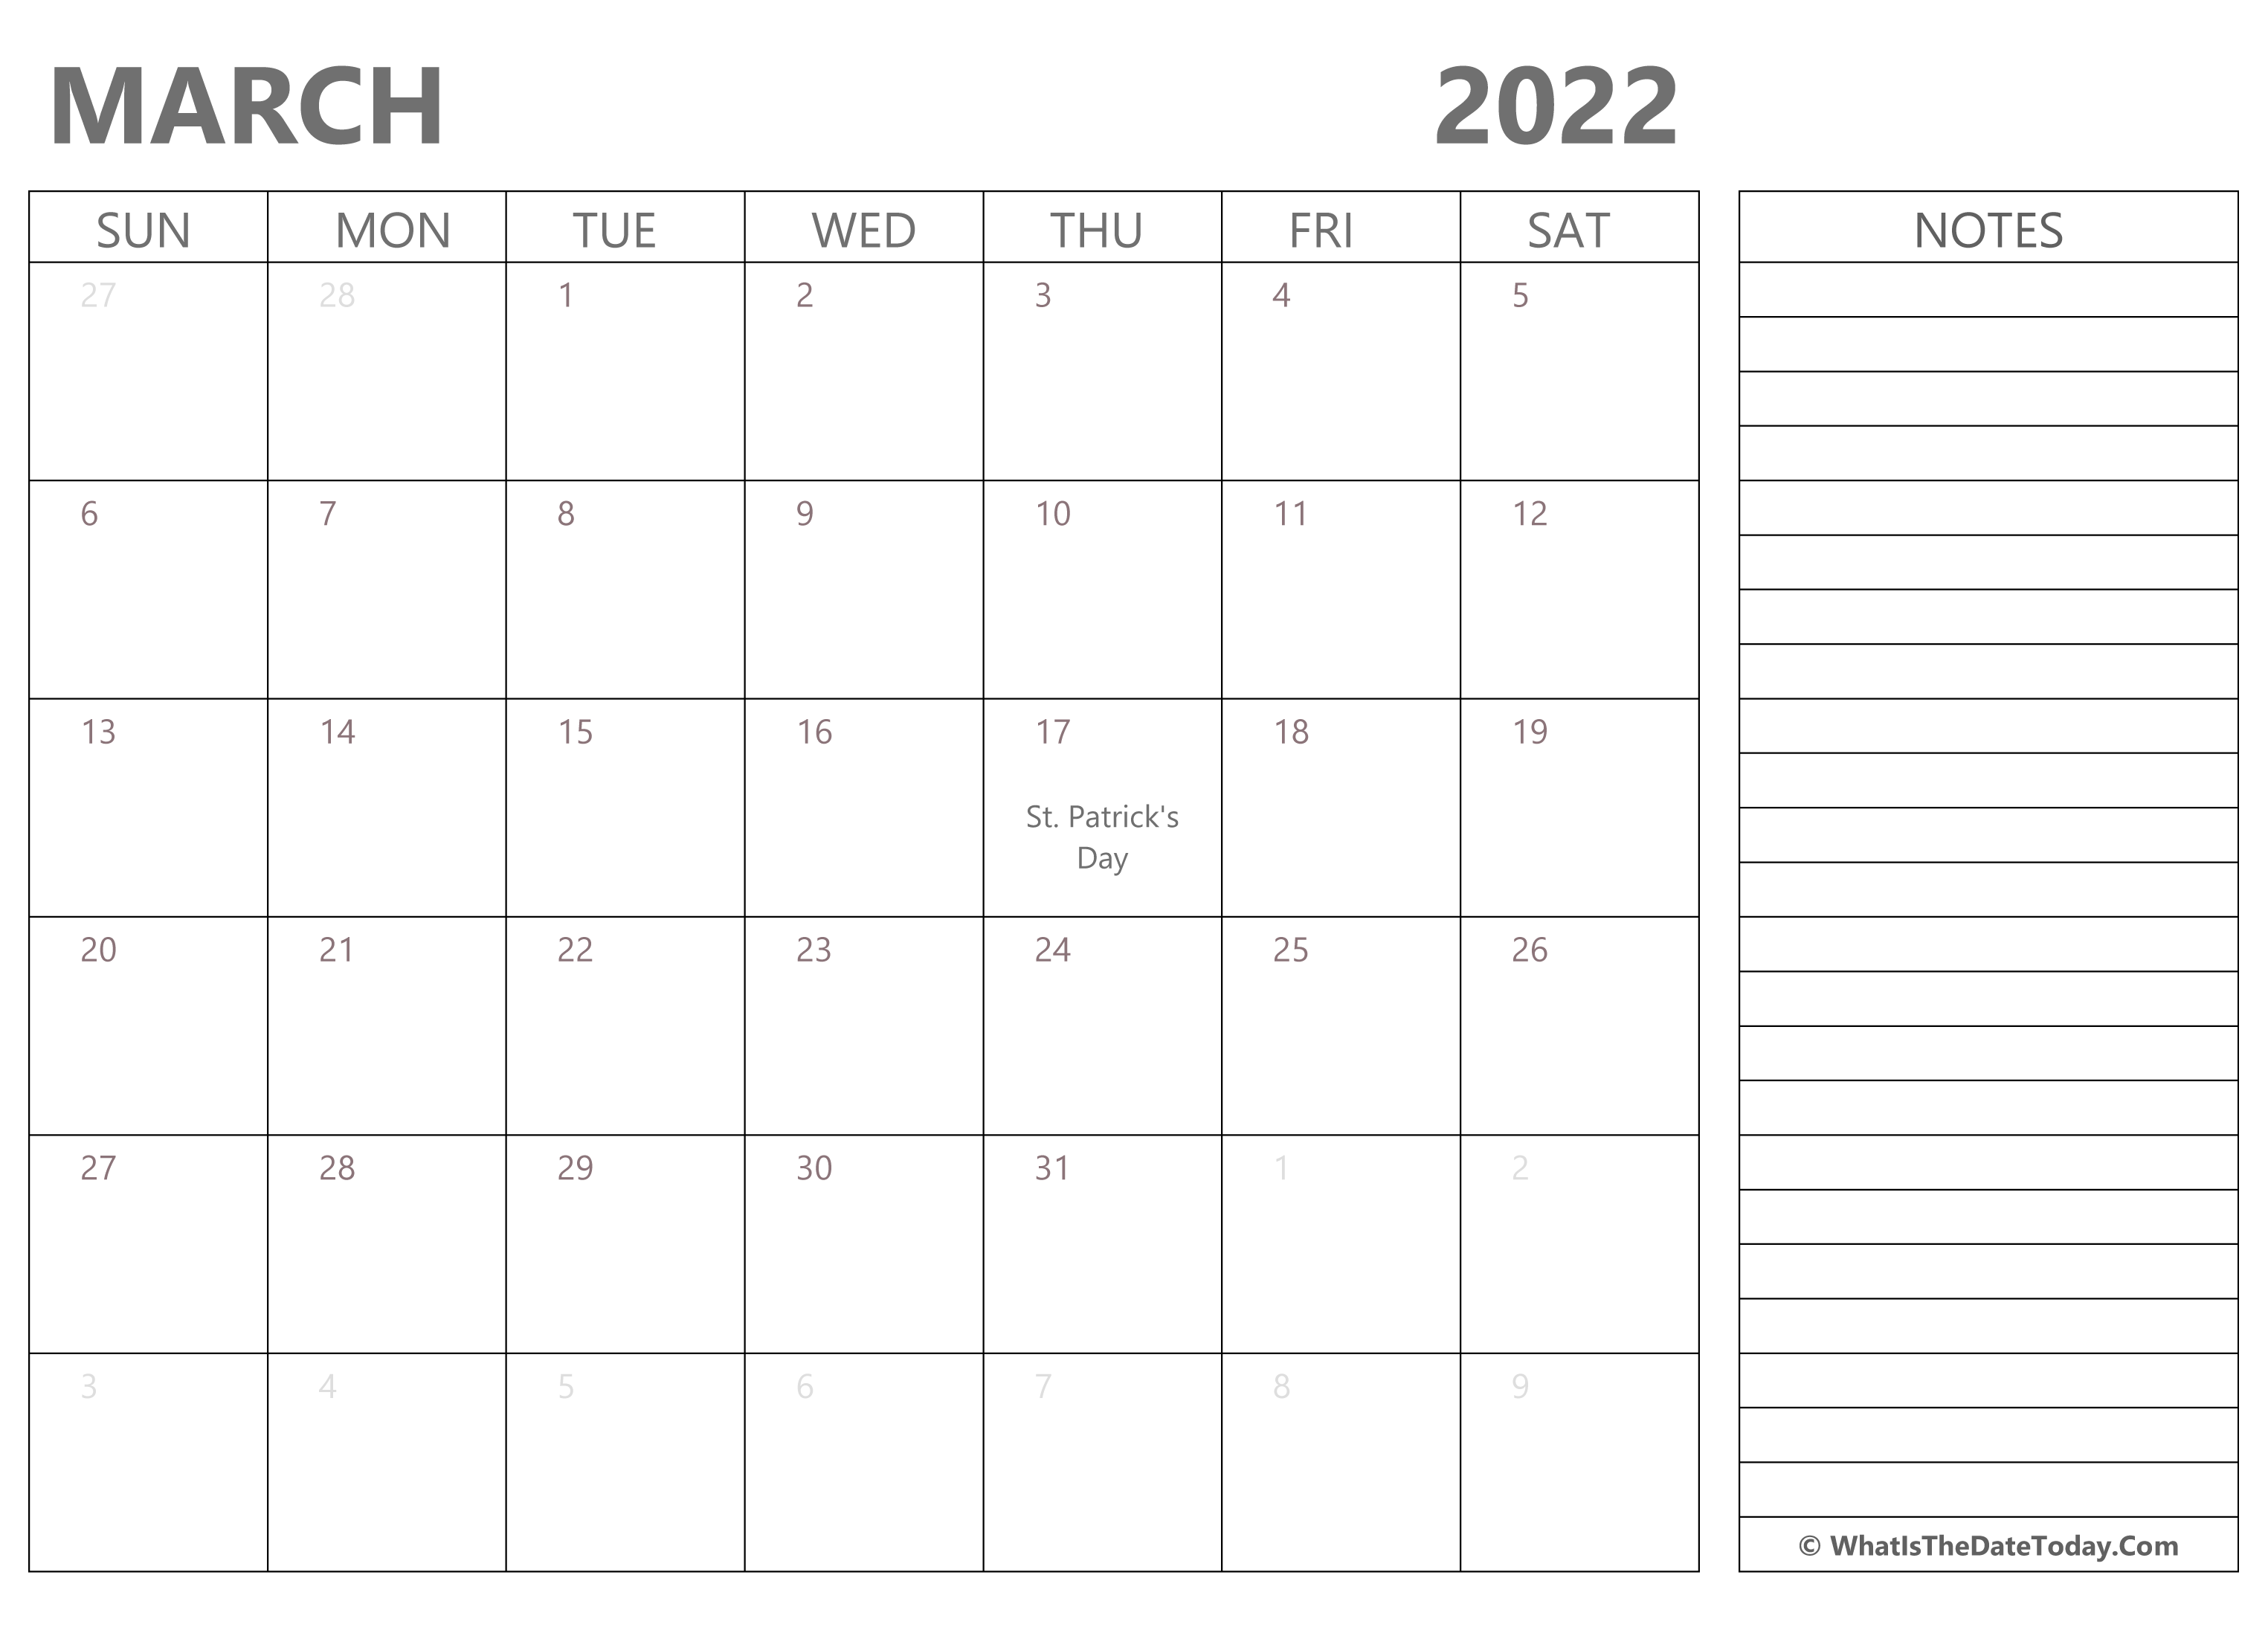 Editable March 2022 Calendar Editable March 2022 Calendar With Holidays And Notes |  Whatisthedatetoday.com